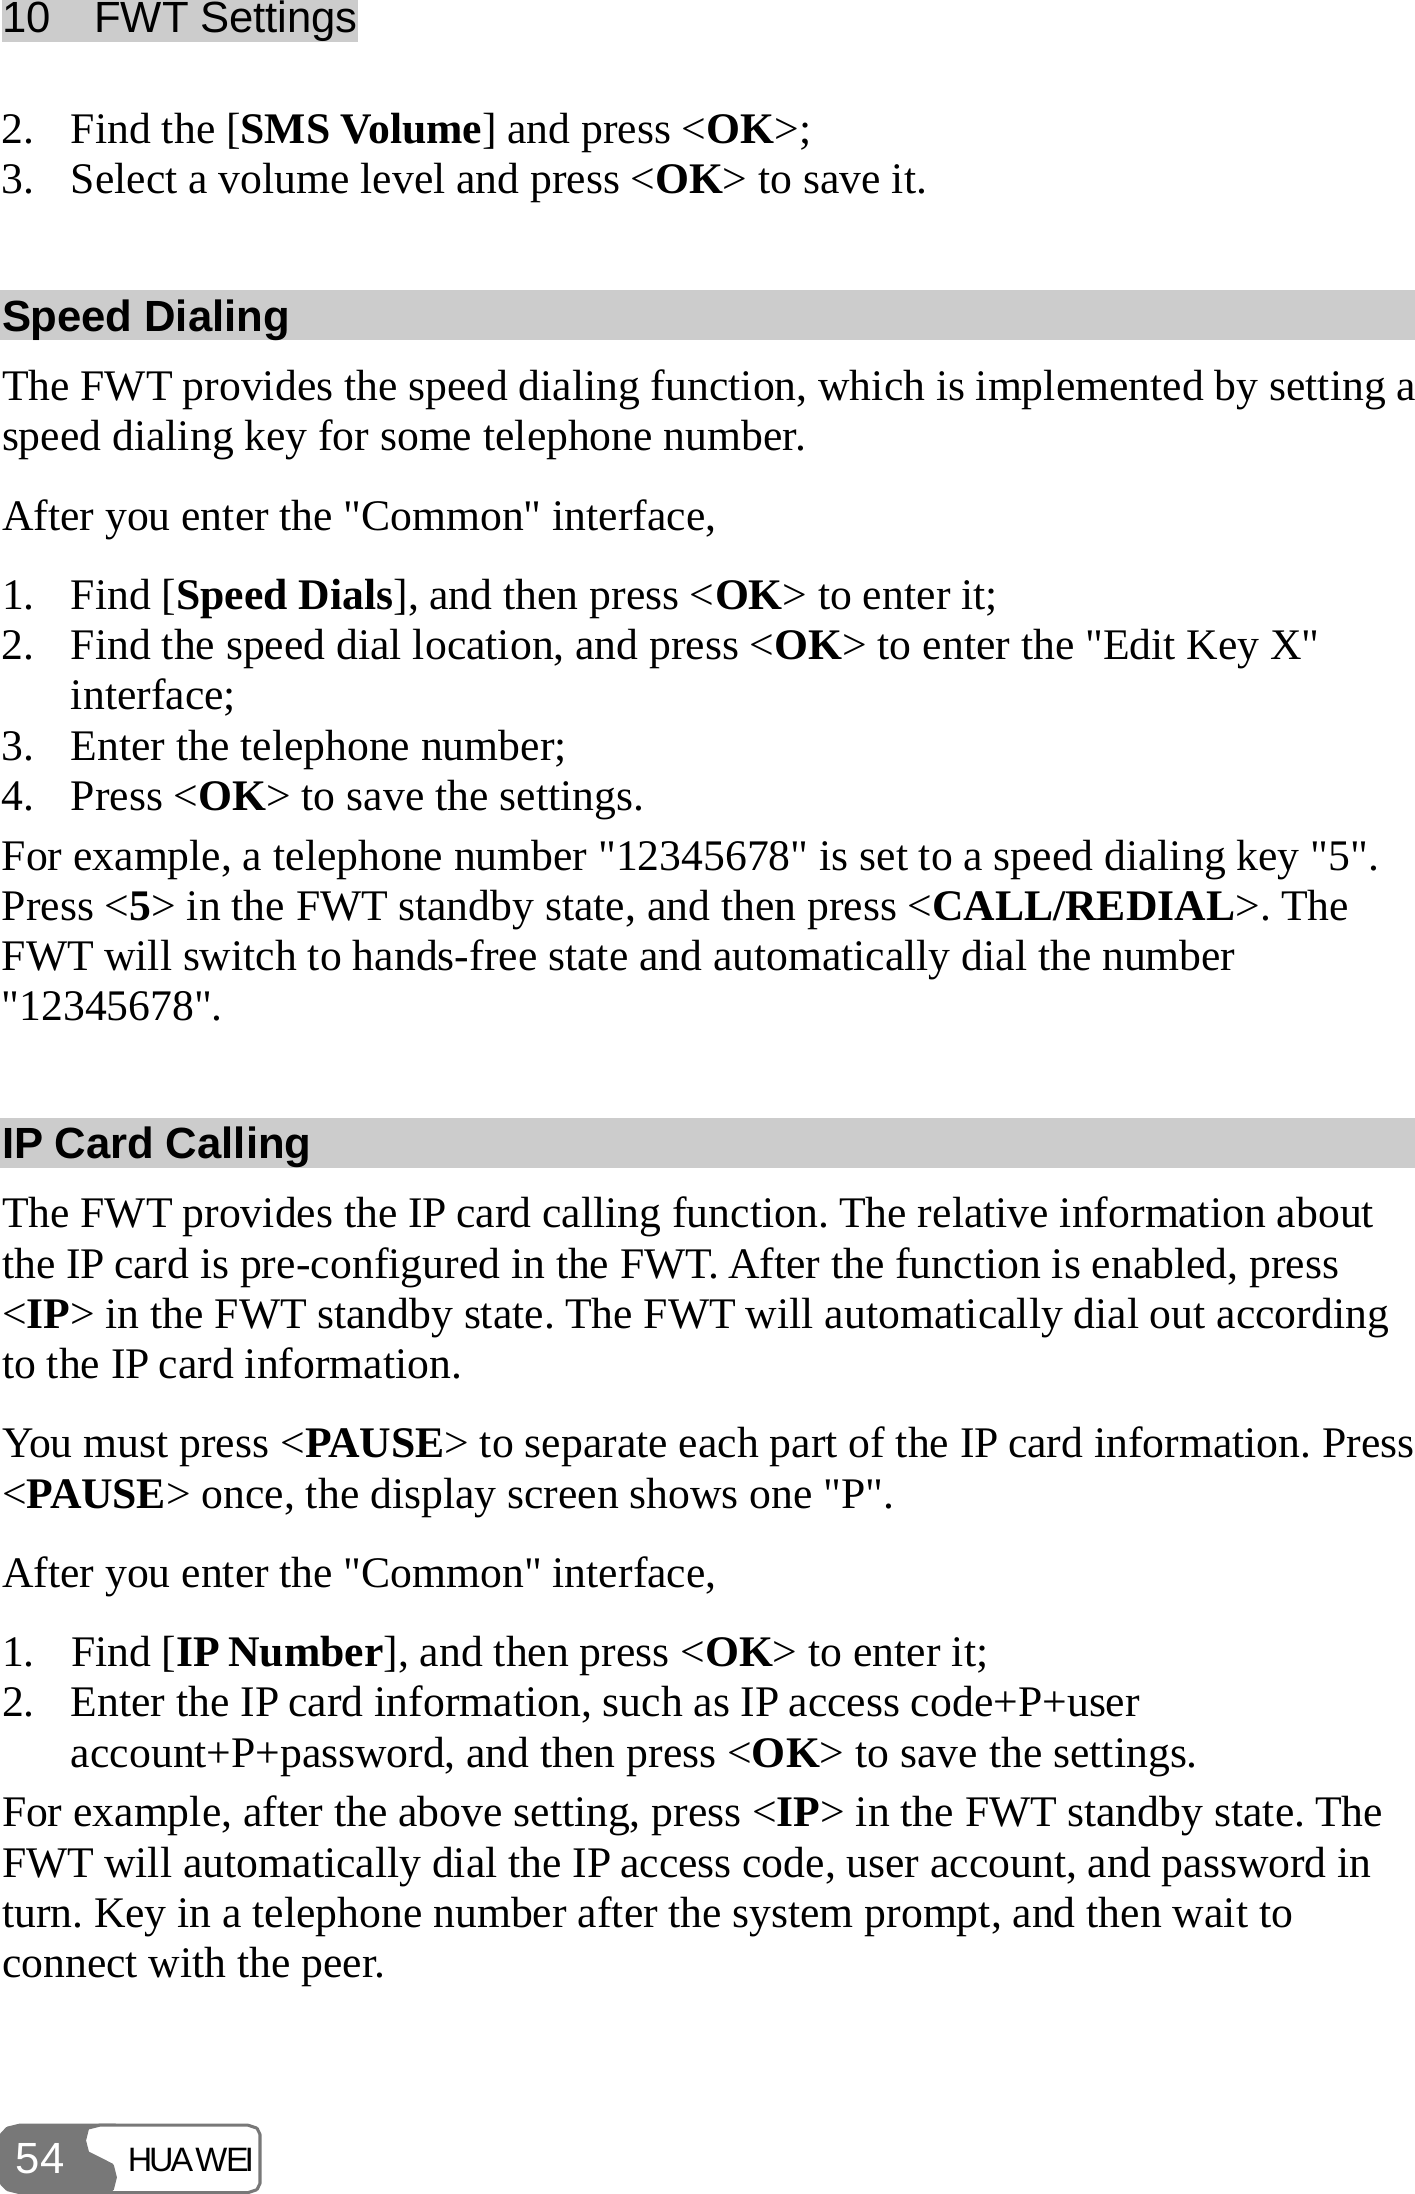 10  FWT Settings HUAWEI 54 2. Find the [SMS Volume] and press &lt;OK&gt;; 3. Select a volume level and press &lt;OK&gt; to save it. Speed Dialing The FWT provides the speed dialing function, which is implemented by setting a speed dialing key for some telephone number. After you enter the &quot;Common&quot; interface, 1. Find [Speed Dials], and then press &lt;OK&gt; to enter it; 2. Find the speed dial location, and press &lt;OK&gt; to enter the &quot;Edit Key X&quot; interface; 3. Enter the telephone number; 4. Press &lt;OK&gt; to save the settings. For example, a telephone number &quot;12345678&quot; is set to a speed dialing key &quot;5&quot;. Press &lt;5&gt; in the FWT standby state, and then press &lt;CALL/REDIAL&gt;. The FWT will switch to hands-free state and automatically dial the number &quot;12345678&quot;. IP Card Calling The FWT provides the IP card calling function. The relative information about the IP card is pre-configured in the FWT. After the function is enabled, press &lt;IP&gt; in the FWT standby state. The FWT will automatically dial out according to the IP card information. You must press &lt;PAUSE&gt; to separate each part of the IP card information. Press &lt;PAUSE&gt; once, the display screen shows one &quot;P&quot;. After you enter the &quot;Common&quot; interface, 1. Find [IP Number], and then press &lt;OK&gt; to enter it; 2. Enter the IP card information, such as IP access code+P+user account+P+password, and then press &lt;OK&gt; to save the settings. For example, after the above setting, press &lt;IP&gt; in the FWT standby state. The FWT will automatically dial the IP access code, user account, and password in turn. Key in a telephone number after the system prompt, and then wait to connect with the peer.  